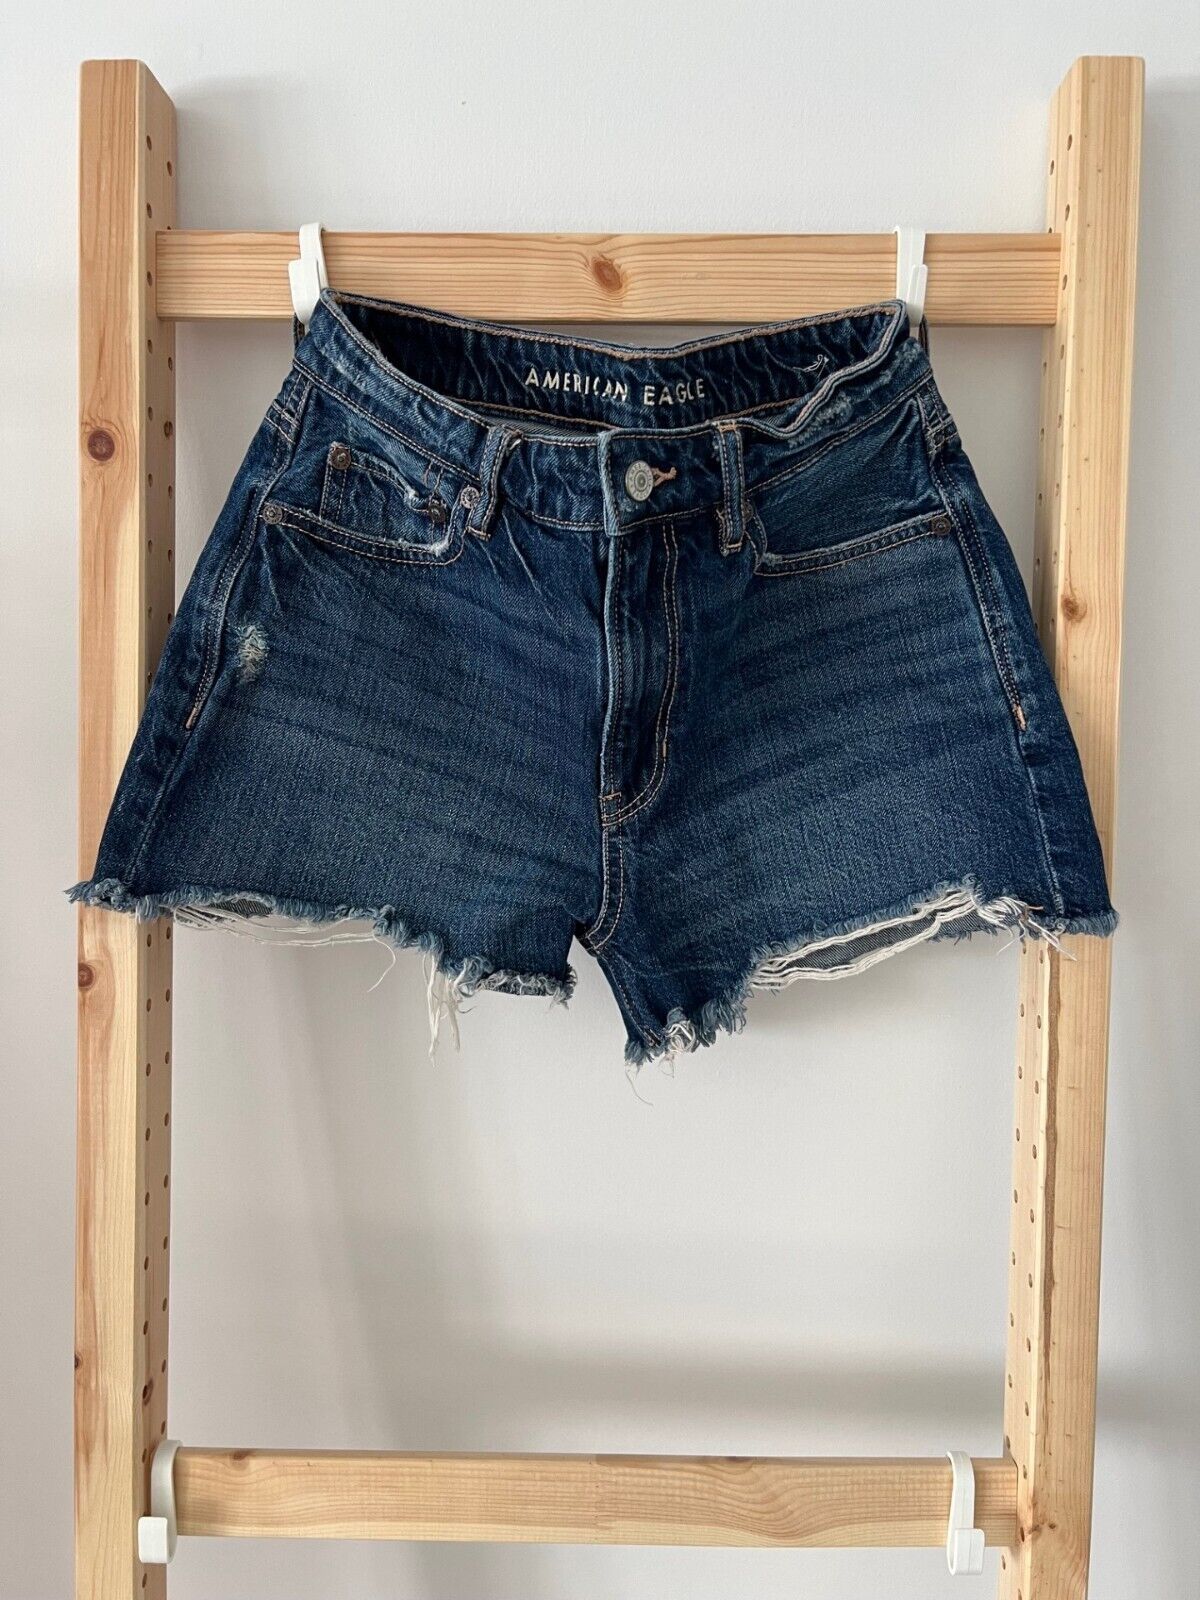 Primary image for American Eagle Denim Cut Offs Jean Shorts Blue ( 2 )